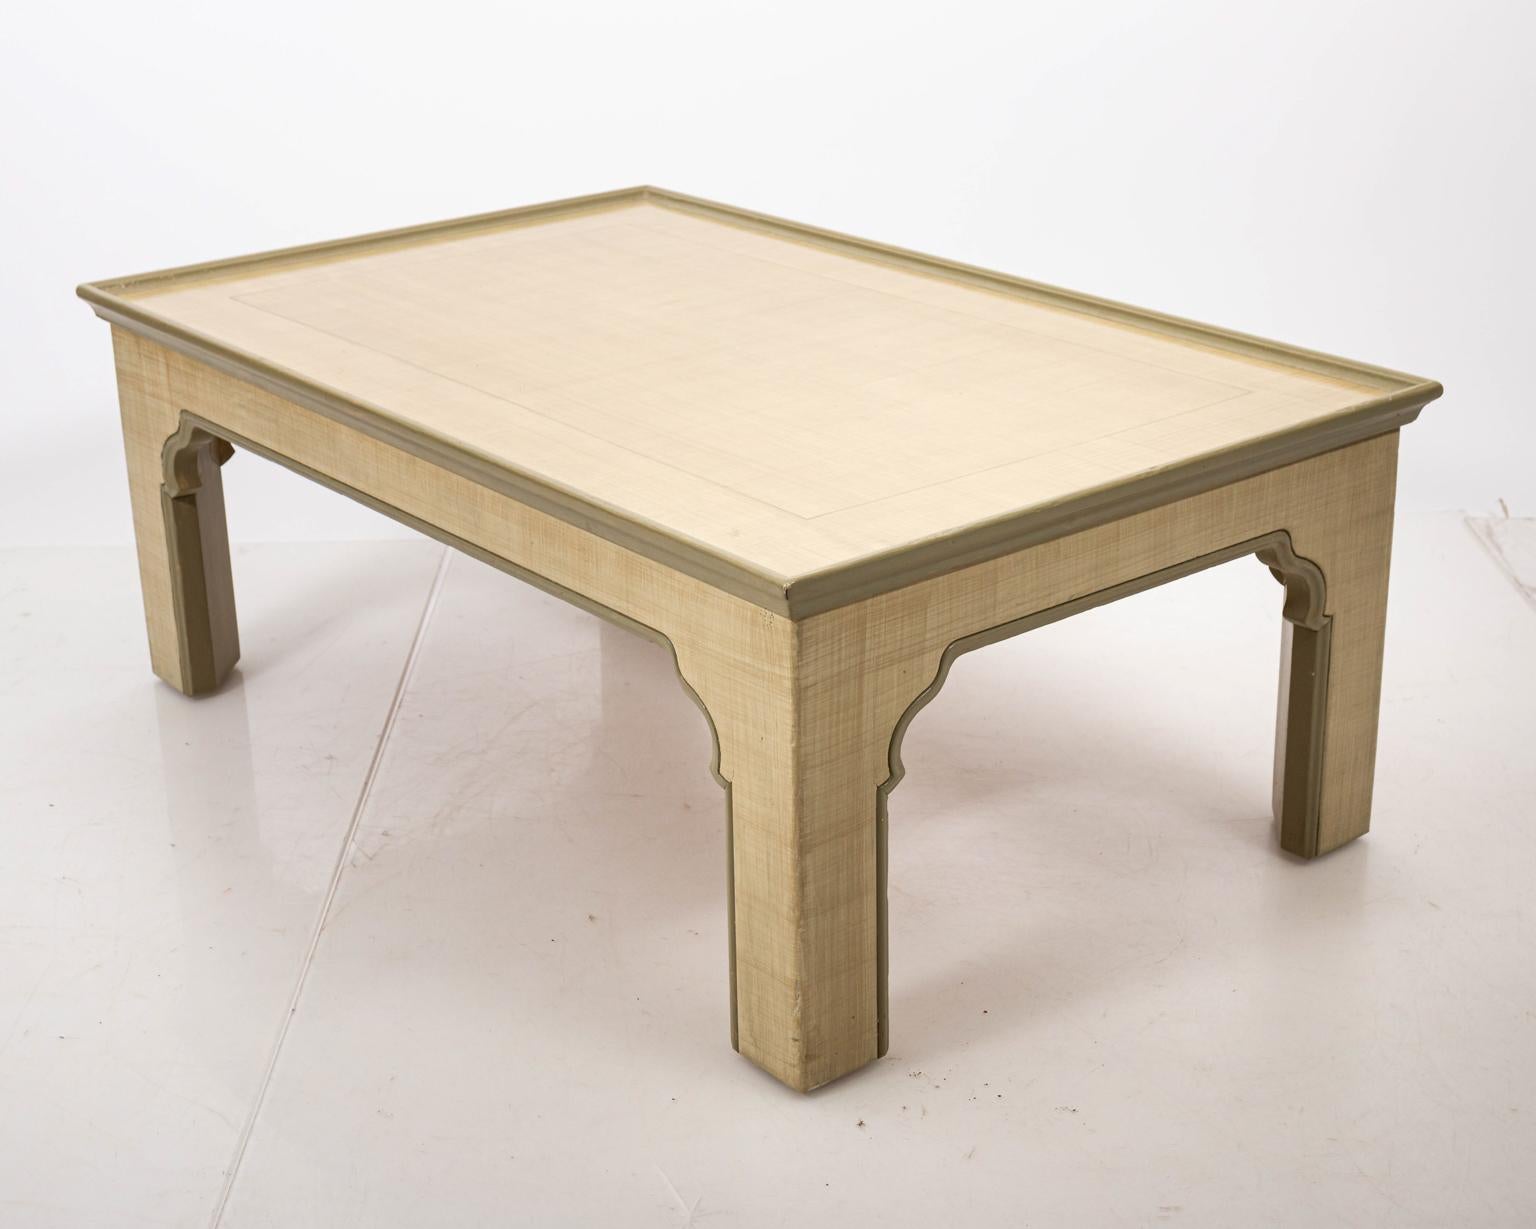 Wood Hand Stained Rectangular Coffee Table by Bob Christian